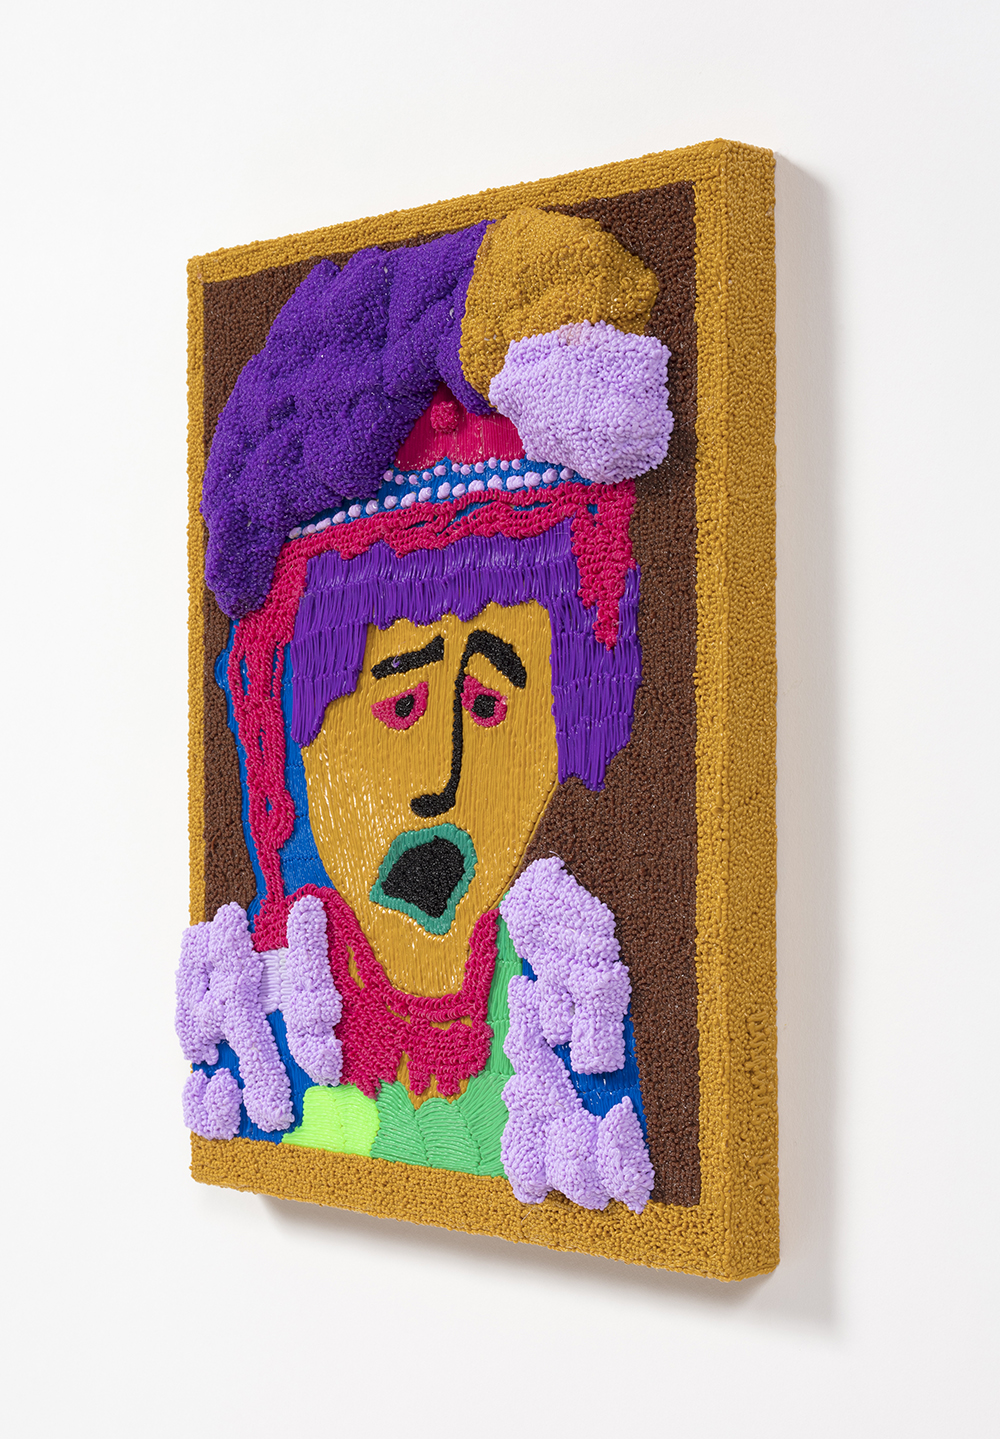 Dominic Dispirito. <em>The girl with the purple barnet</em>, 2018. Manually printed PLA plastic on board, 11 3/4 x 8 1/4 inches  (30 x 21 cm)